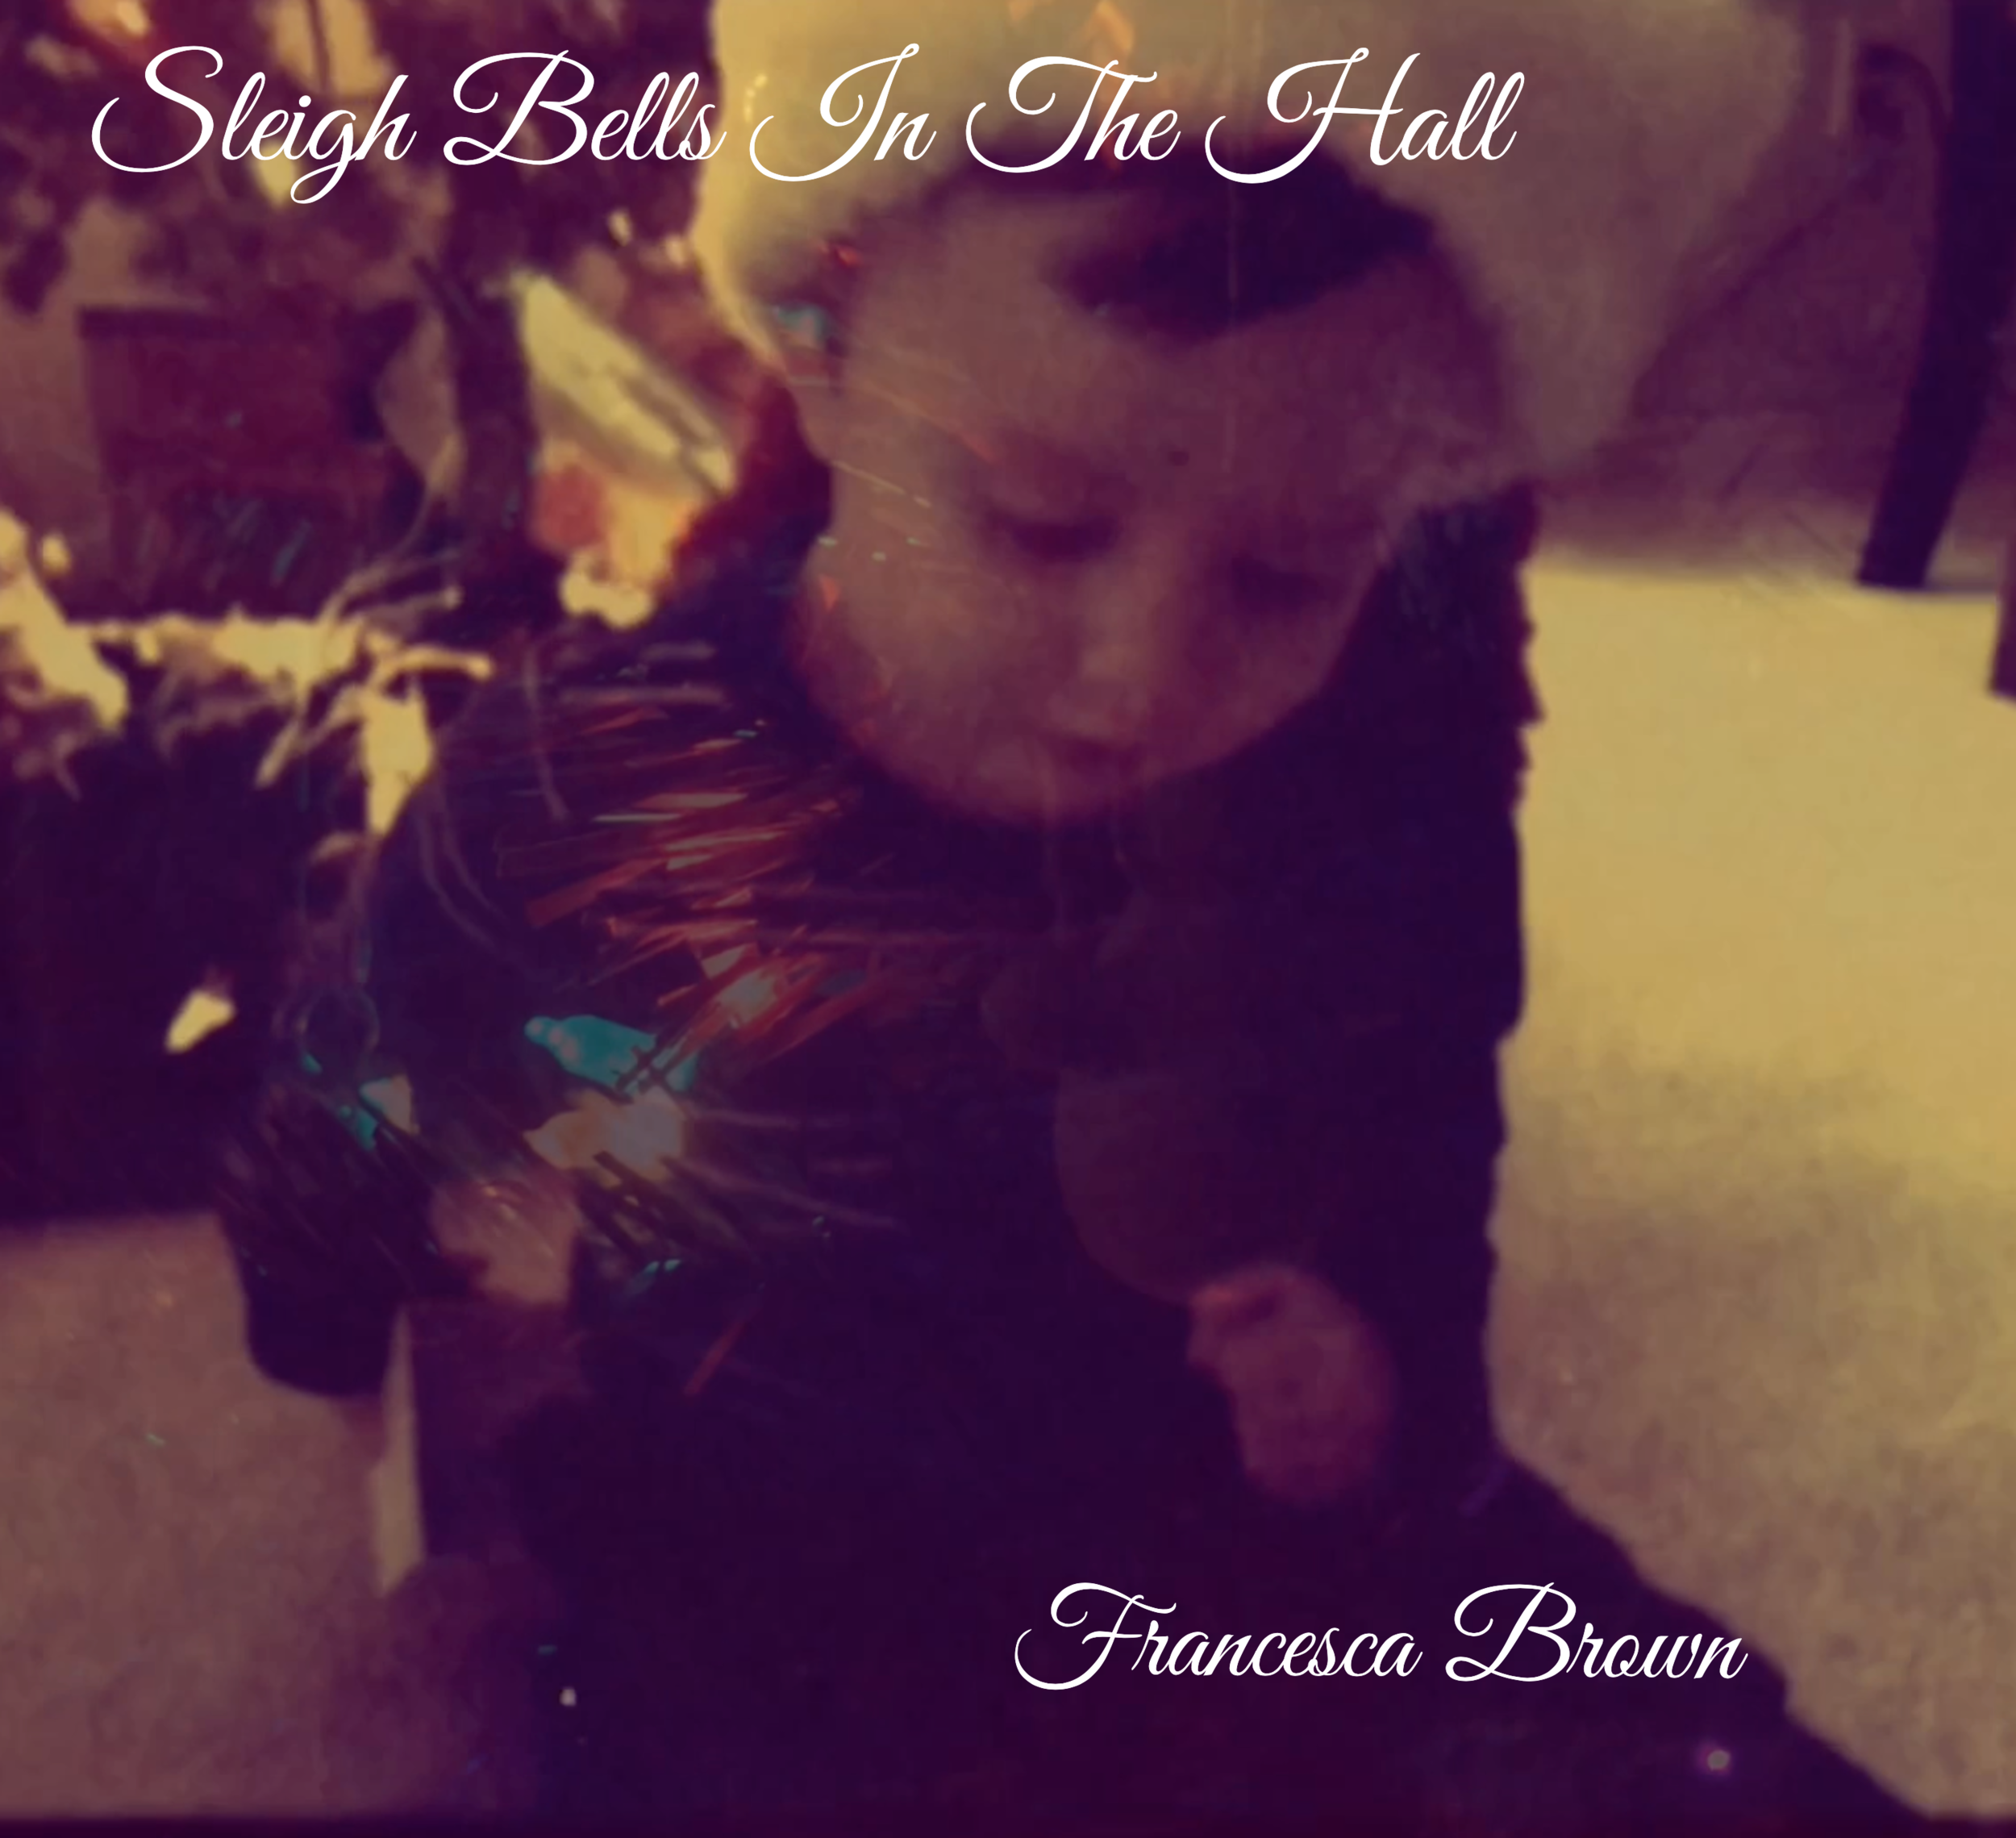 Francesca Brown - Sleigh Bells in the Hall